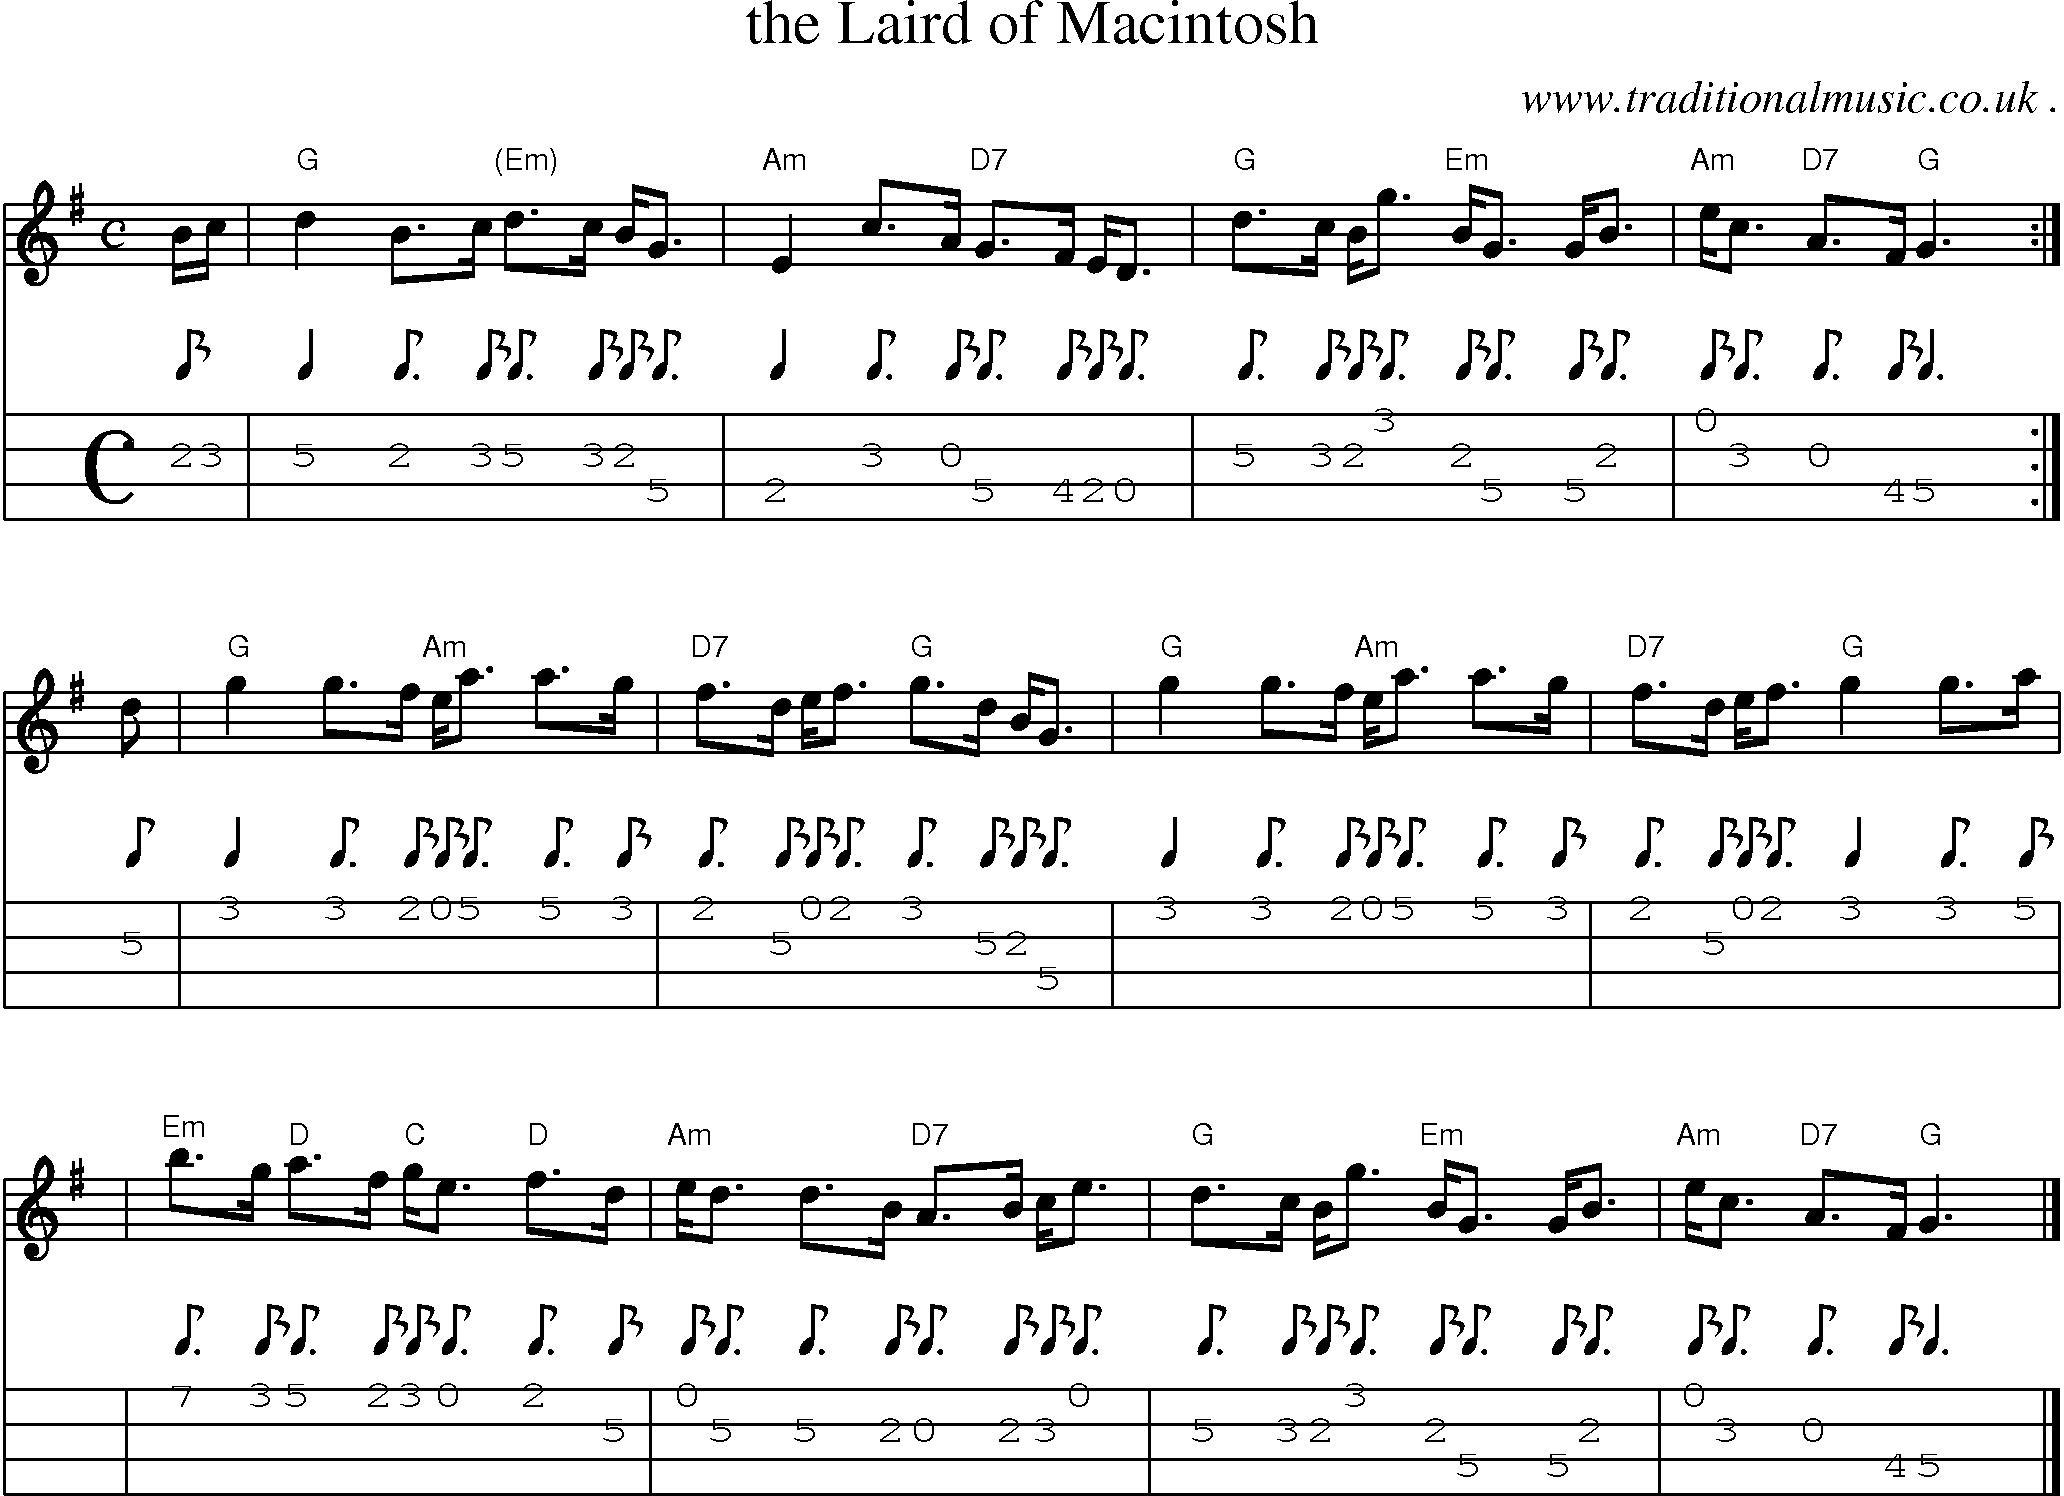 Sheet-music  score, Chords and Mandolin Tabs for The Laird Of Macintosh